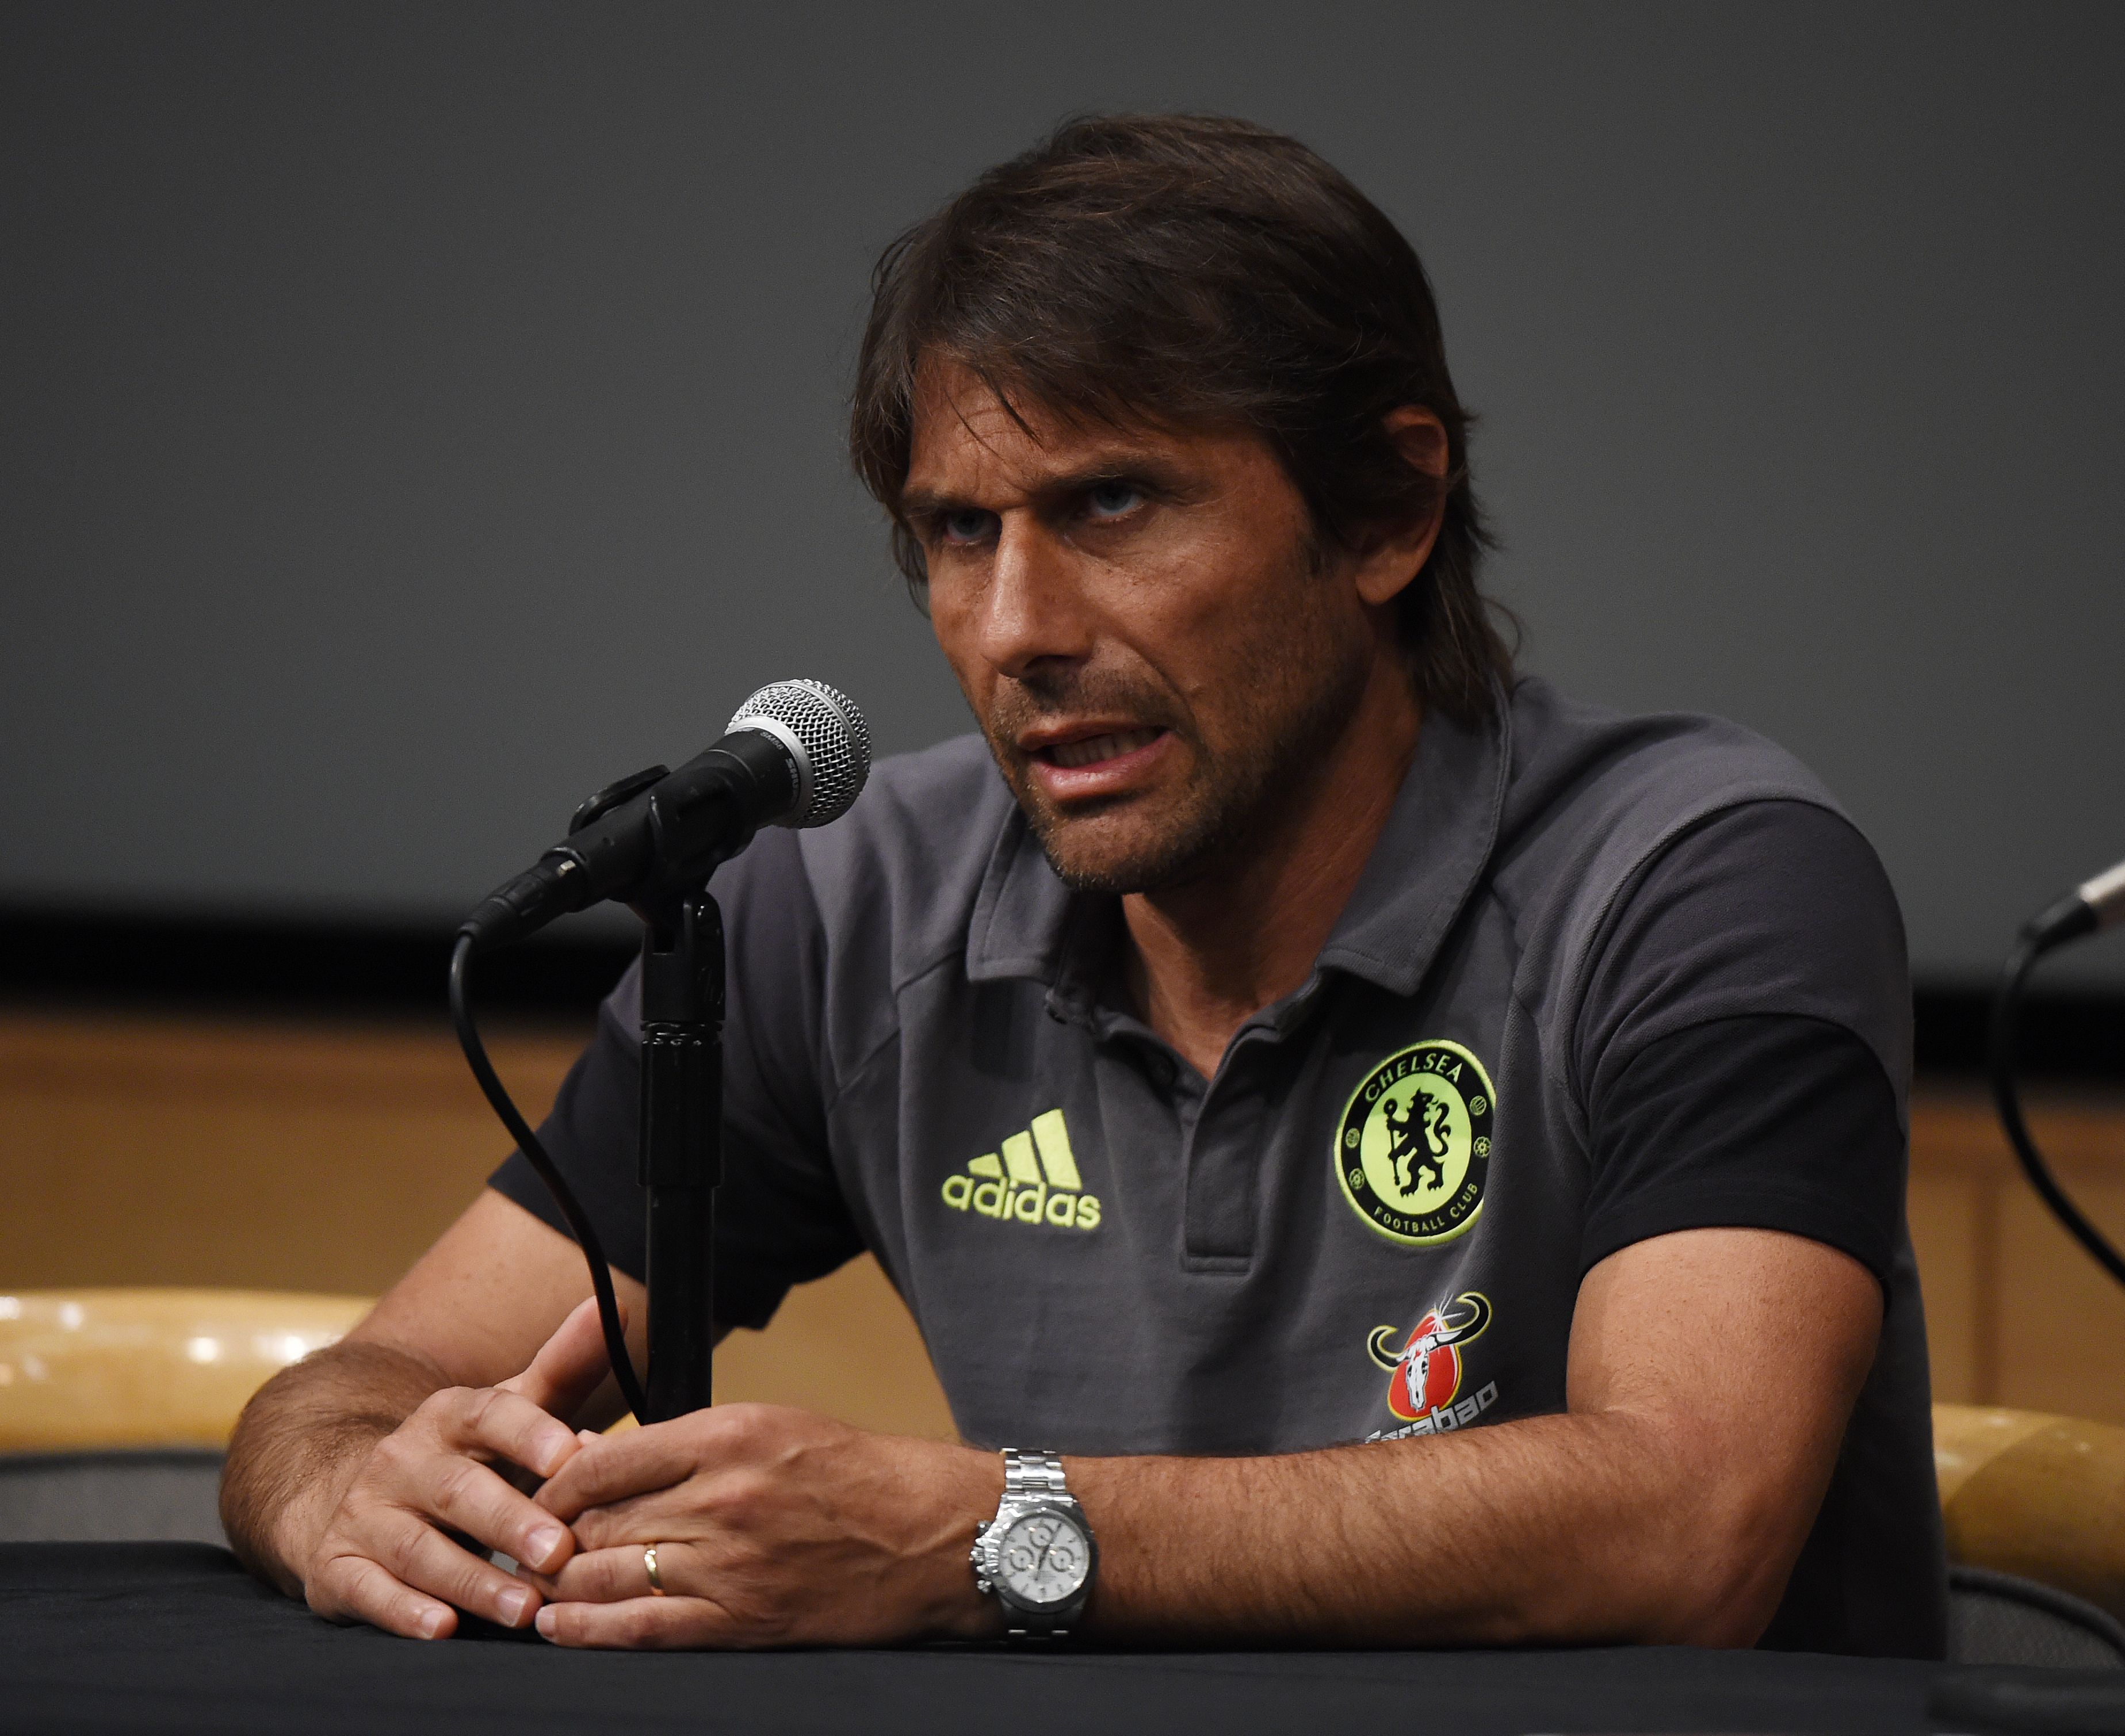 New Chelsea coach Antonio Conte speaks during a press conference before their International Champions Cup (ICC) game against Liverpool, at the UCLA Campus in Westwood, California on July 26, 2016. The two teams will meet at the Rose Bowl on July 27, 2016. / AFP / Mark Ralston (Photo credit should read MARK RALSTON/AFP/Getty Images)